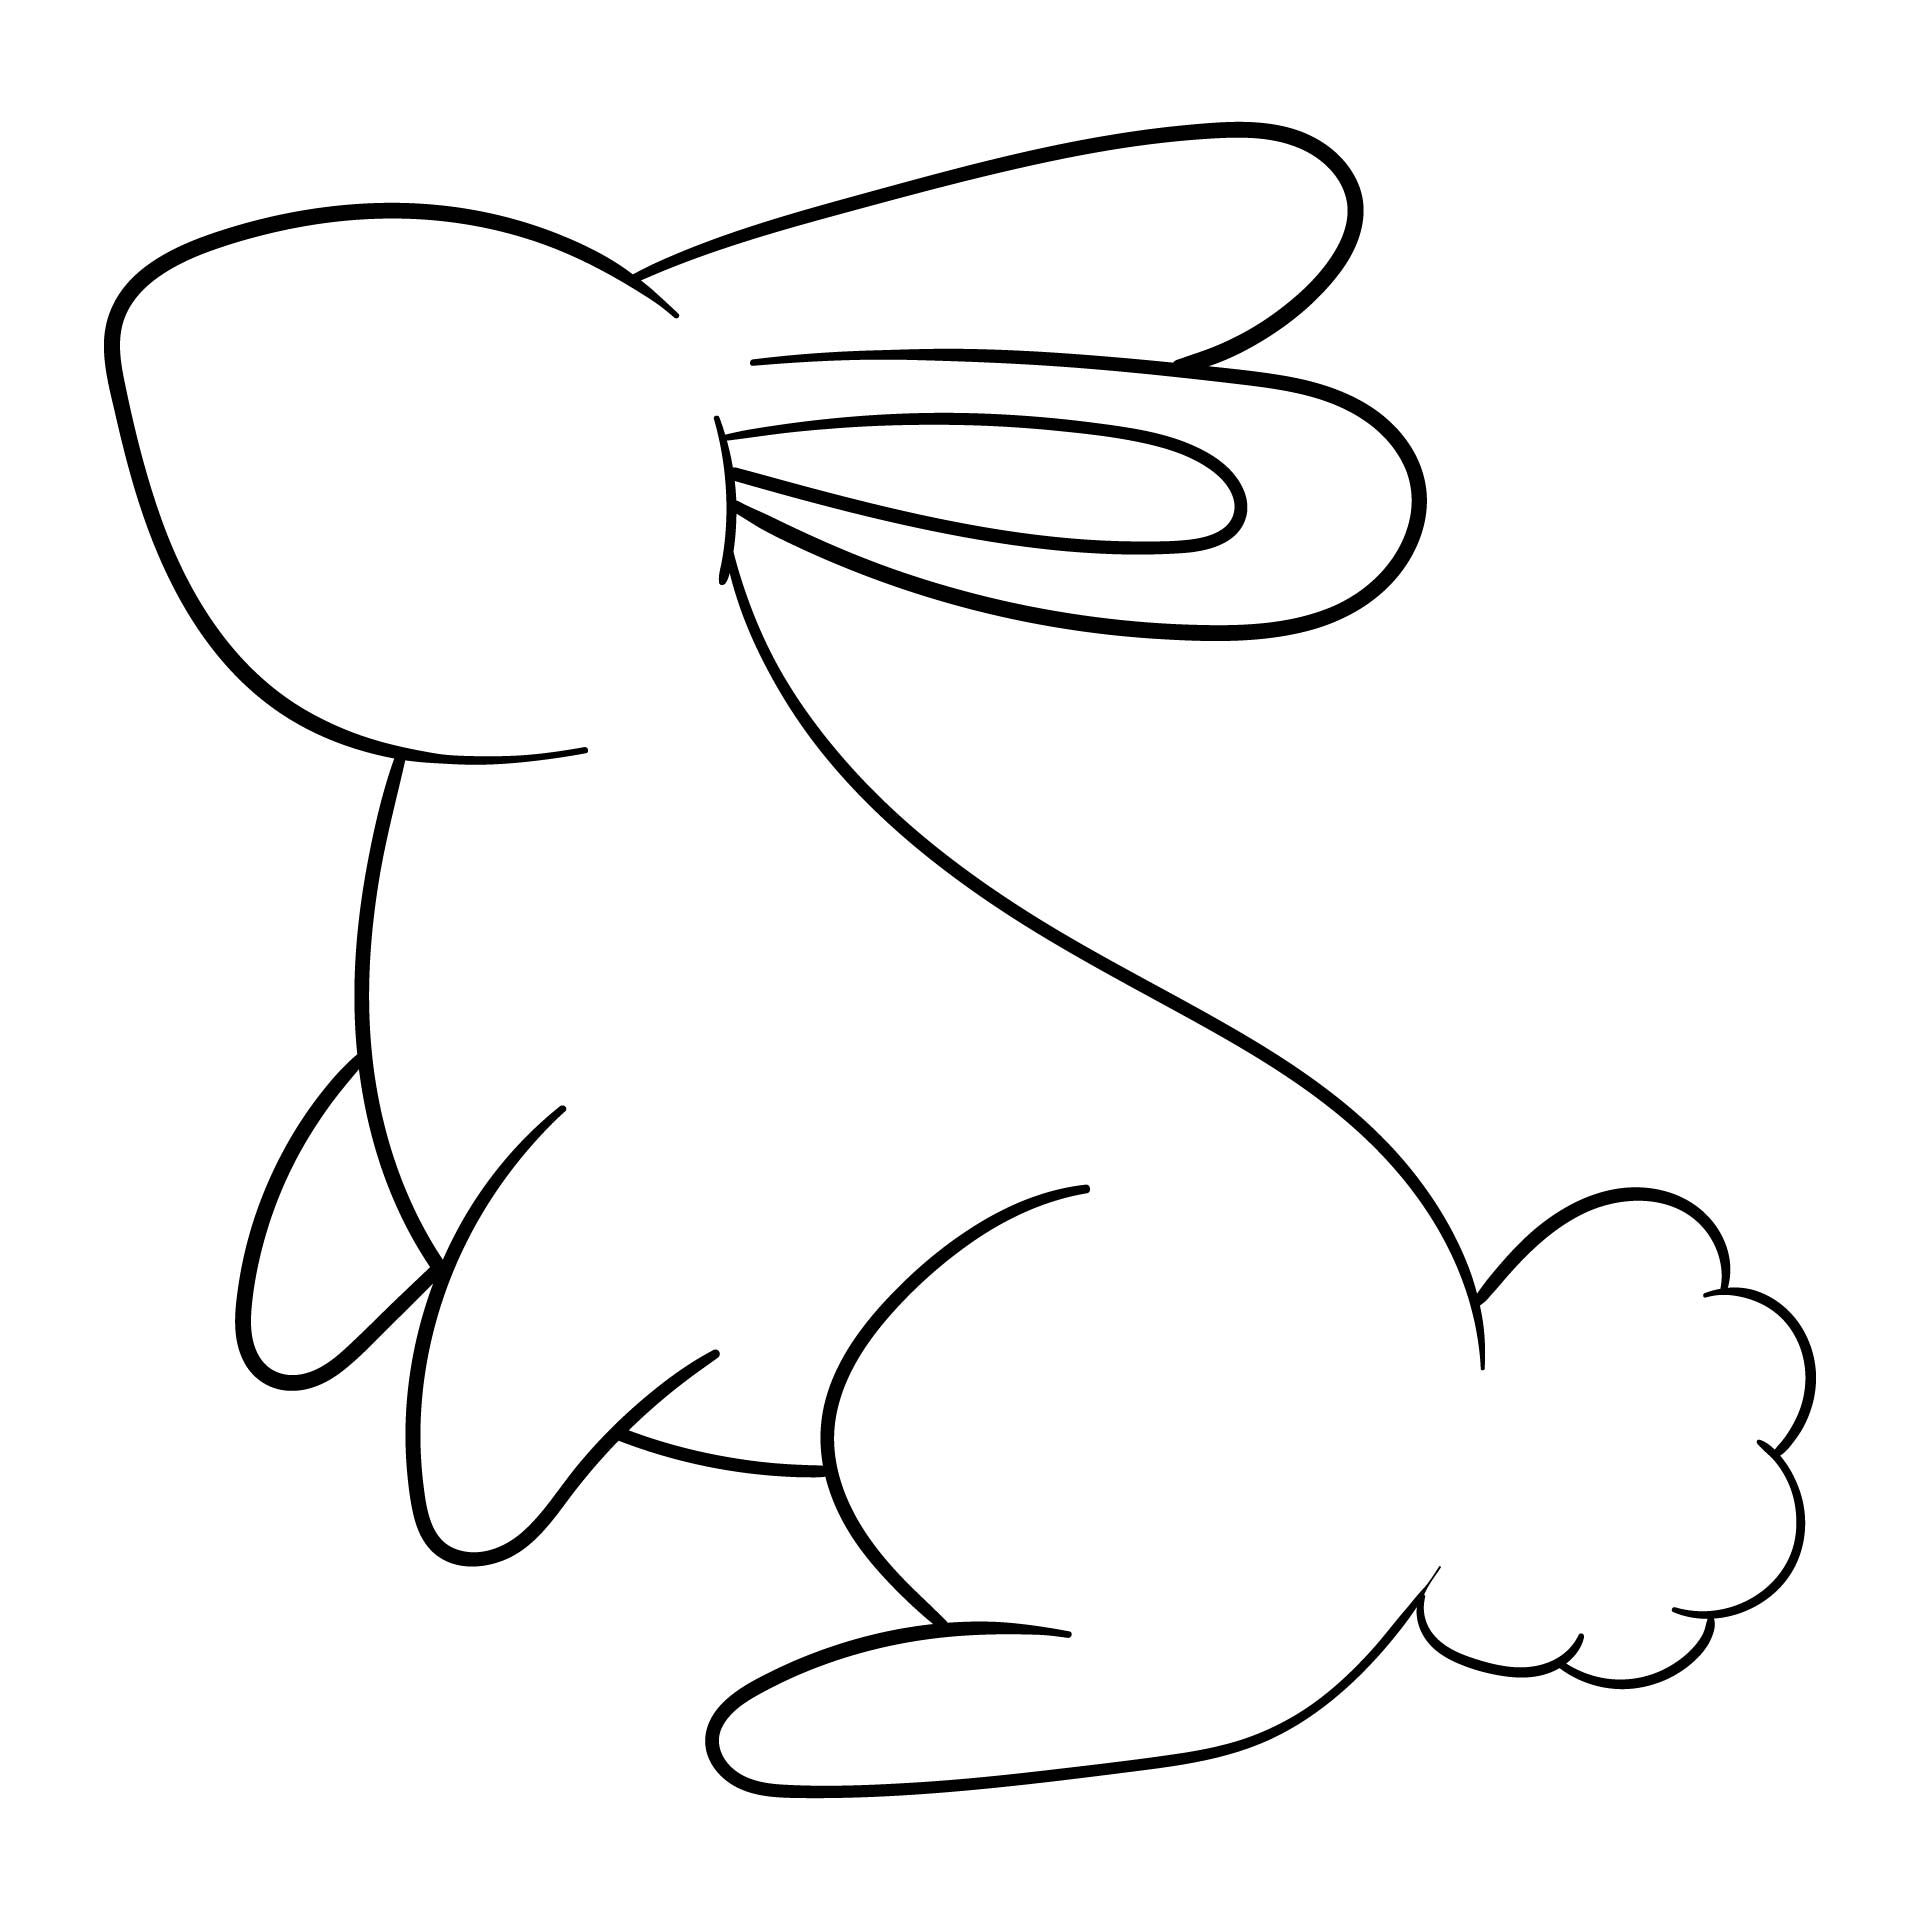 7 Best Images of Easter Chicks Outline Printable Chick Coloring Page Easter Colouring, Bunny